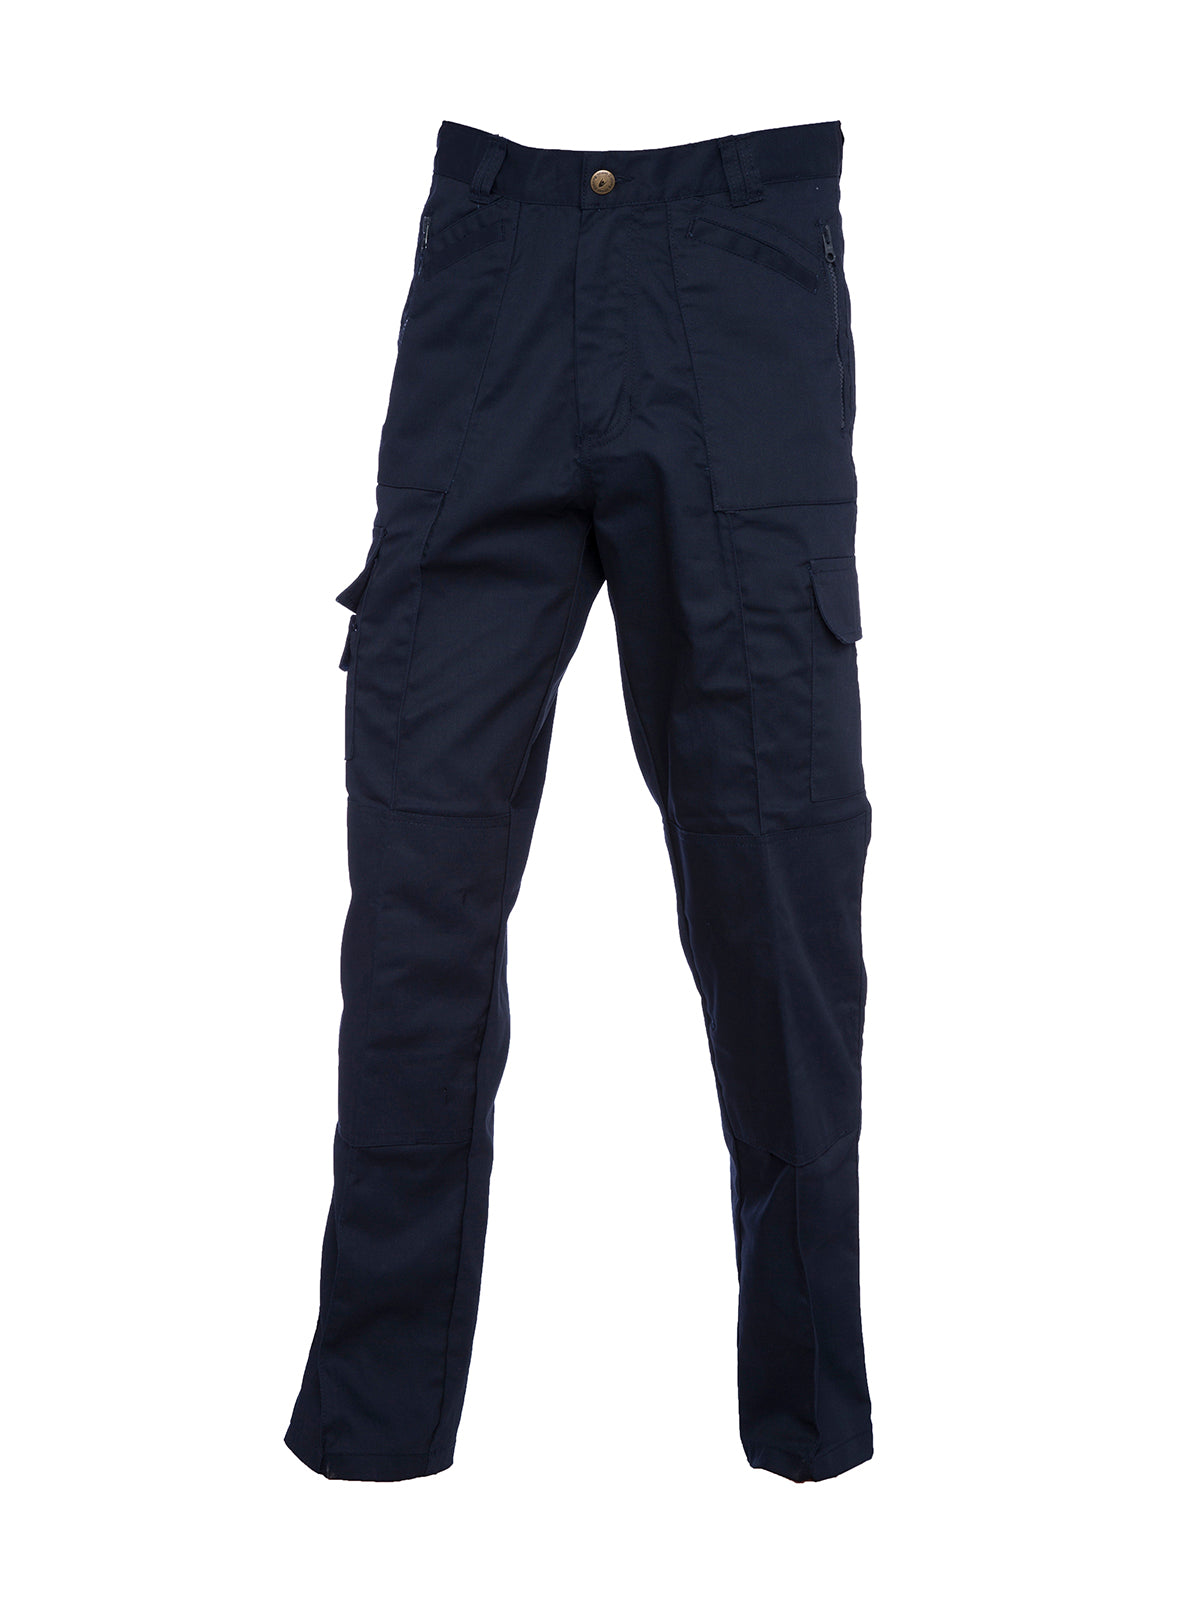 action_trouser_long_navy